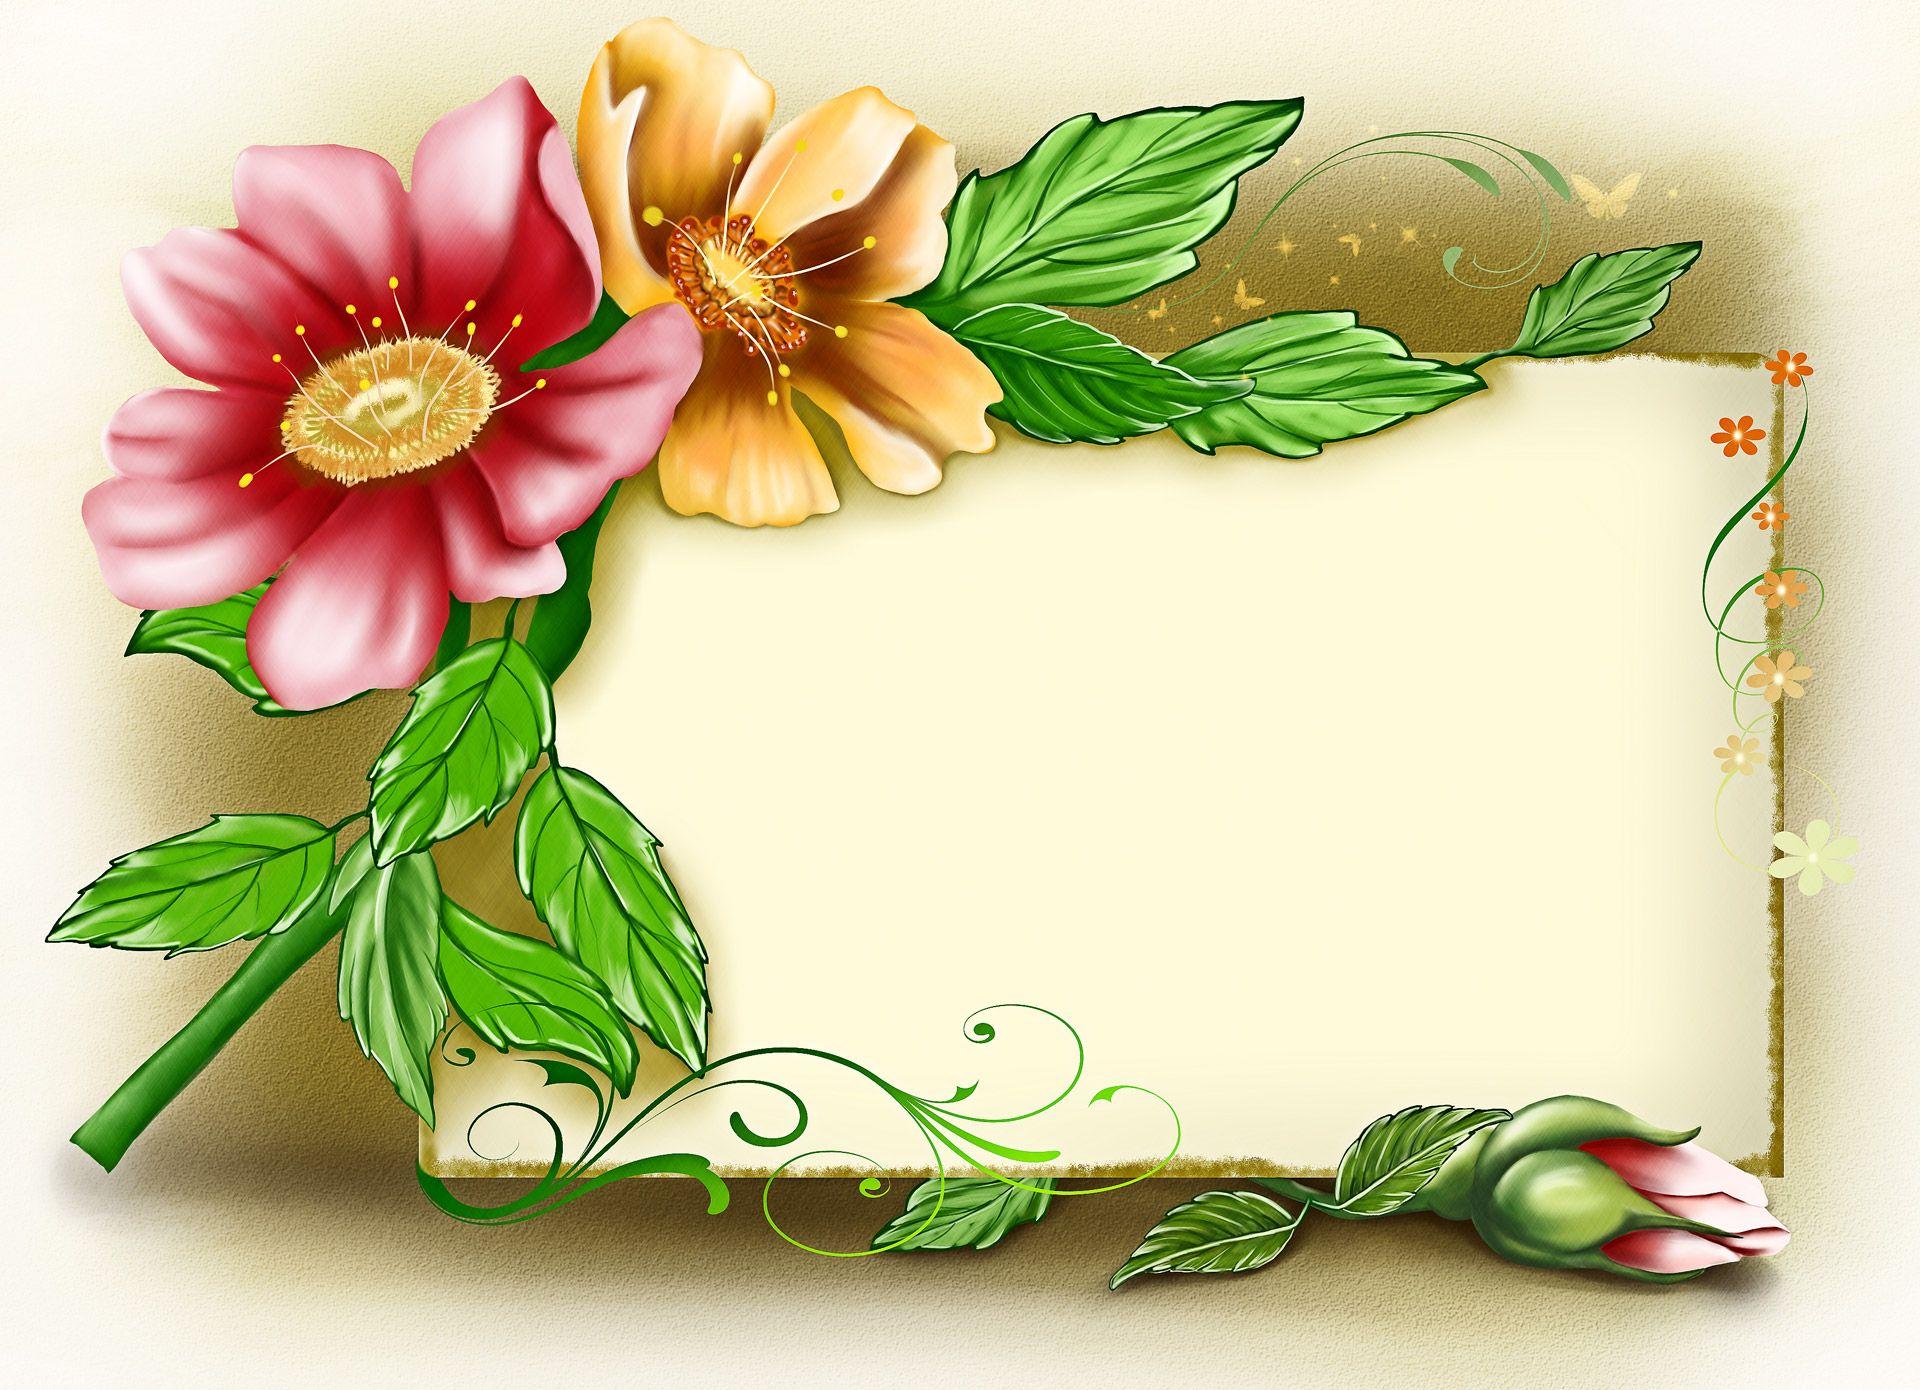 Backgrounds Image Flowers - Wallpaper Cave